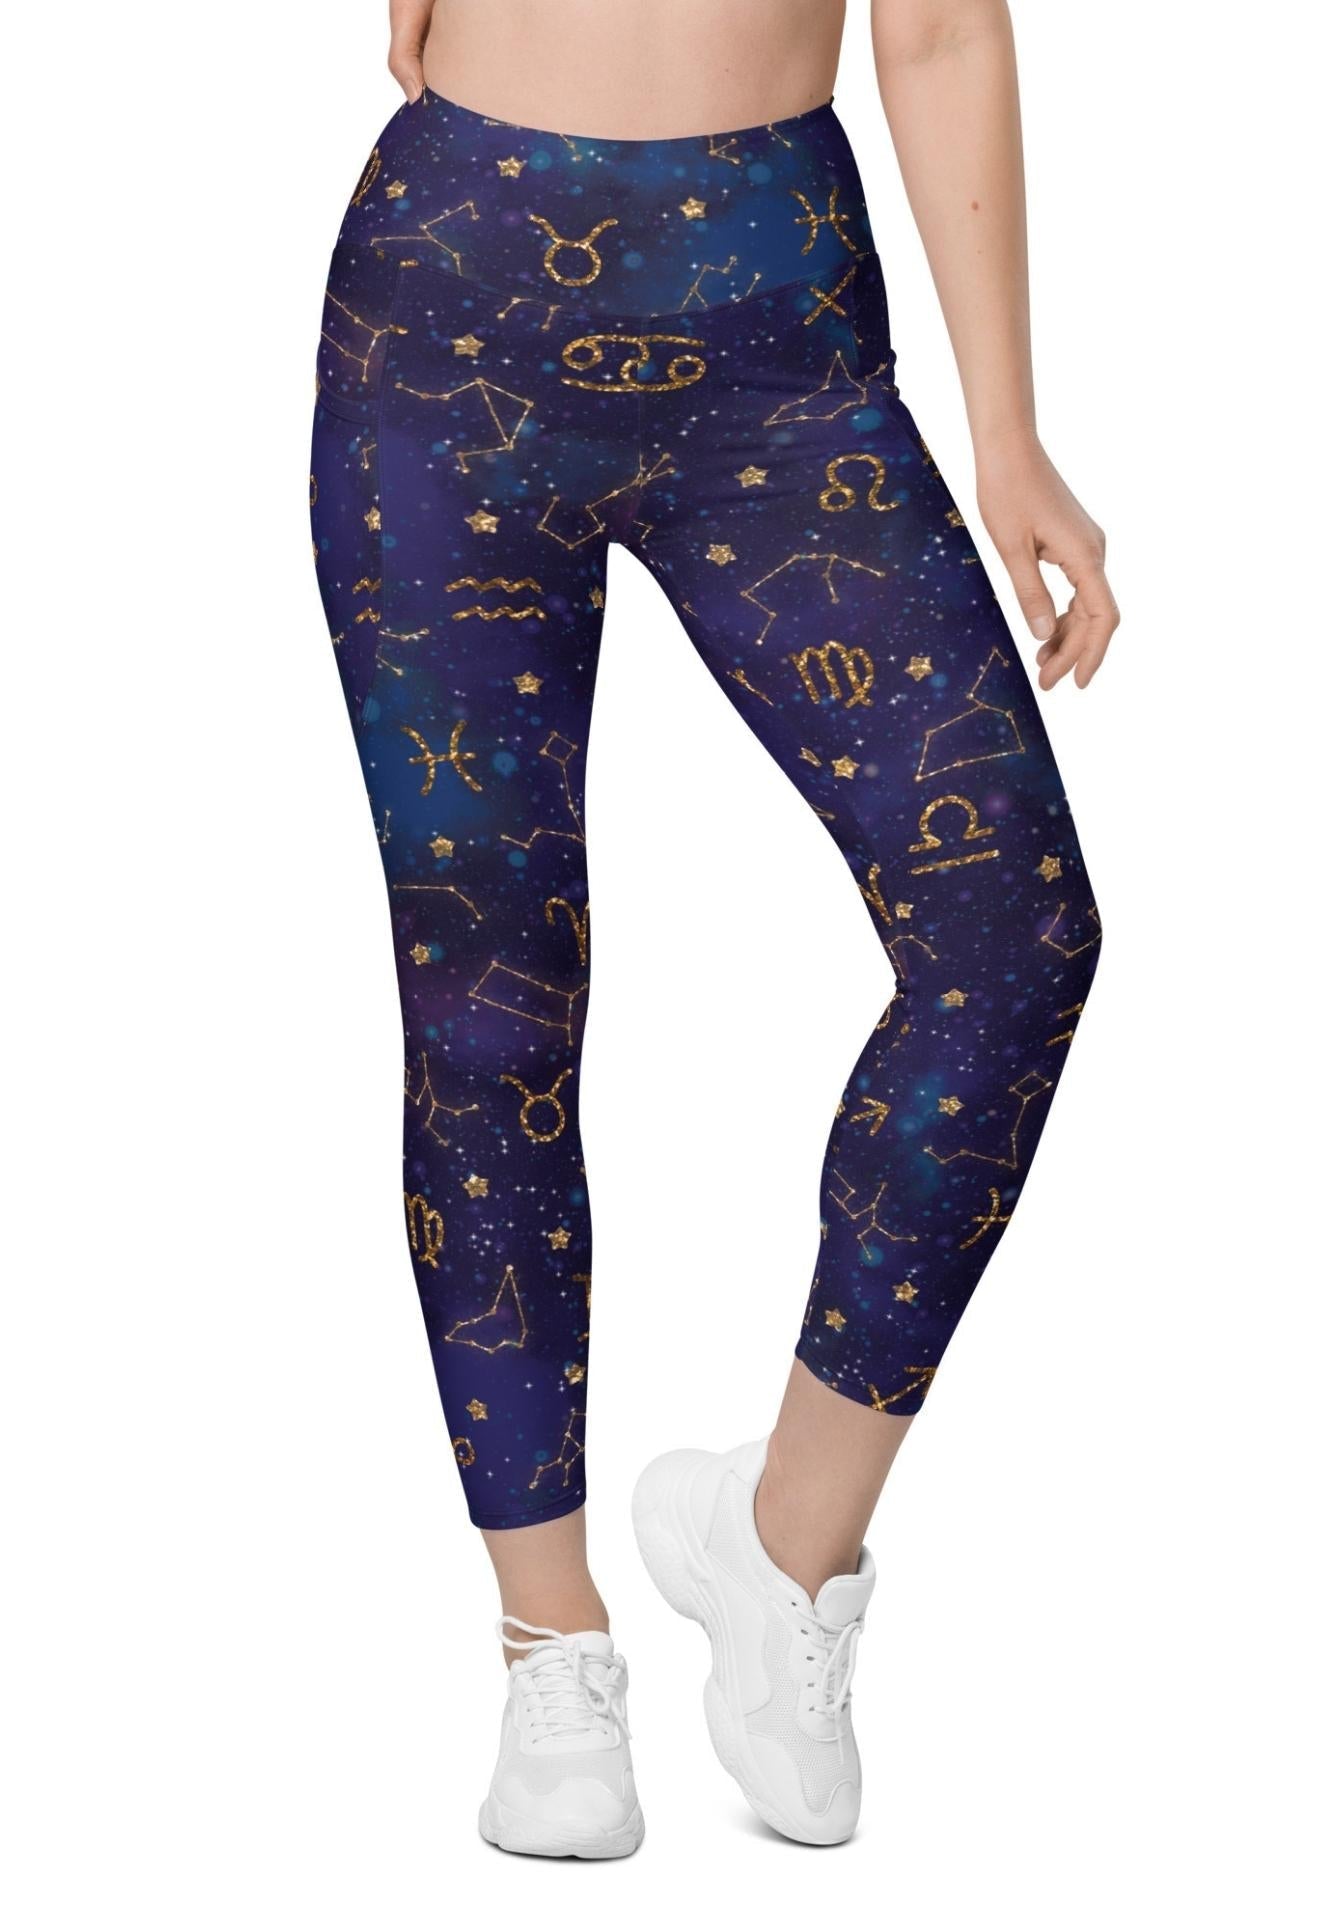 Zodiac Signs Leggings With Pockets